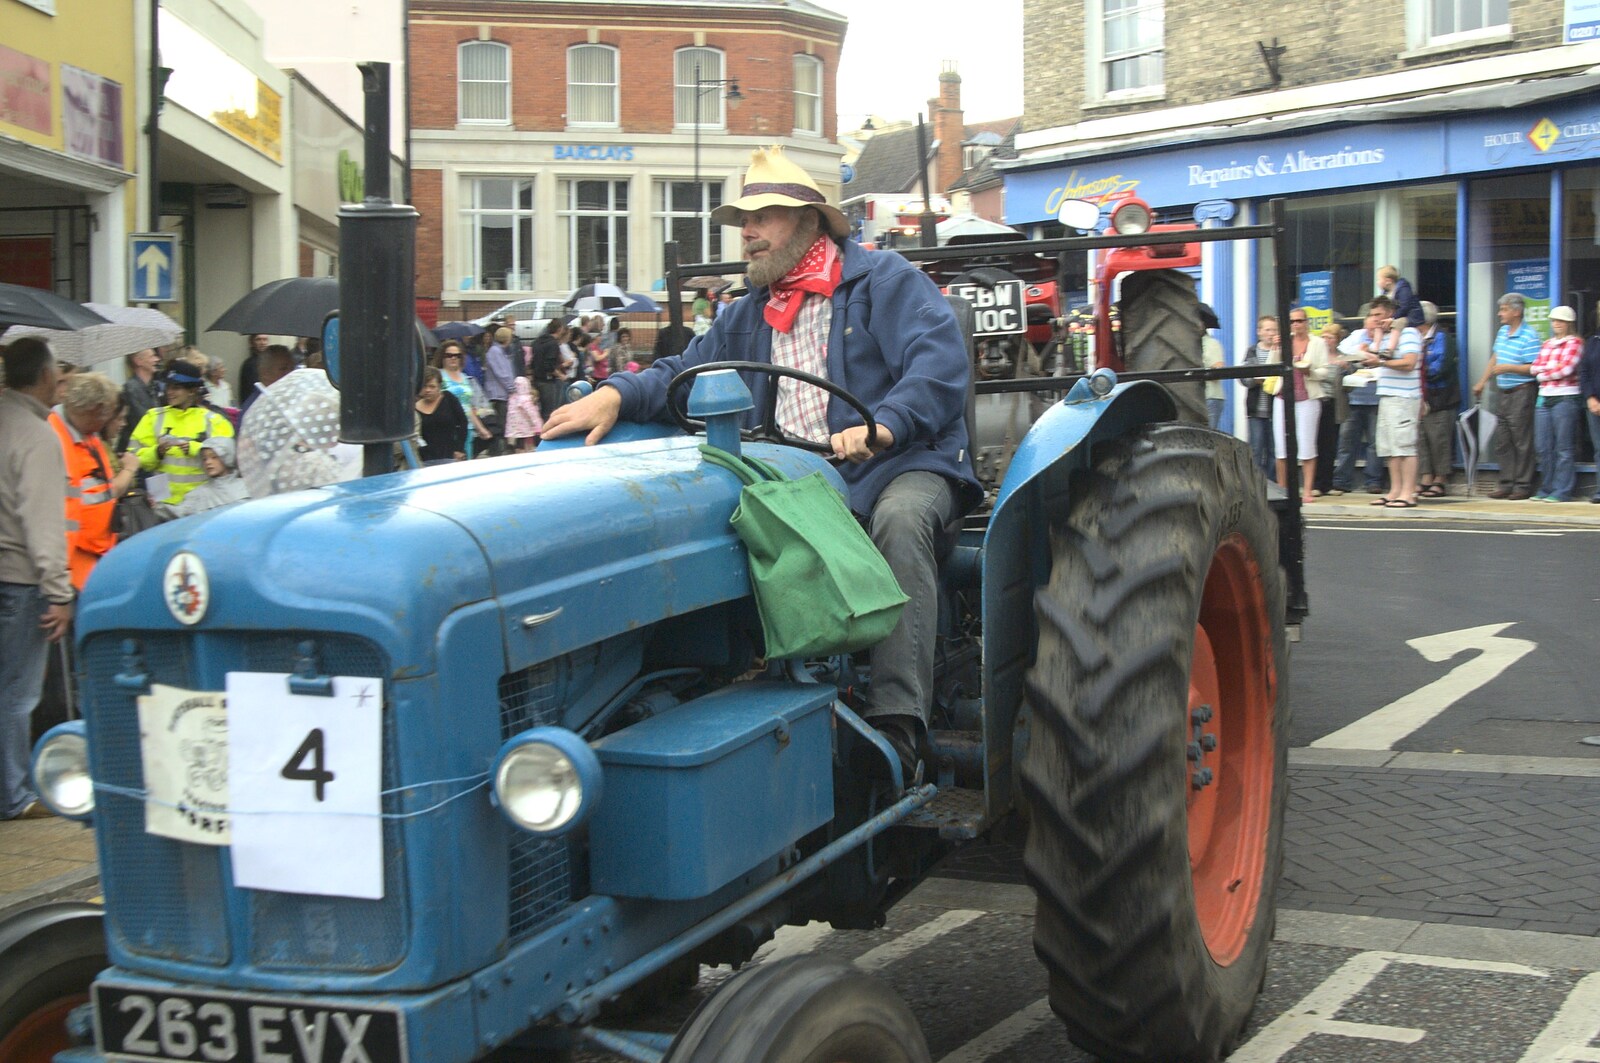 A dude on a tractor from Diss Carnival Procession, Diss, Norfolk - 21st June 2009